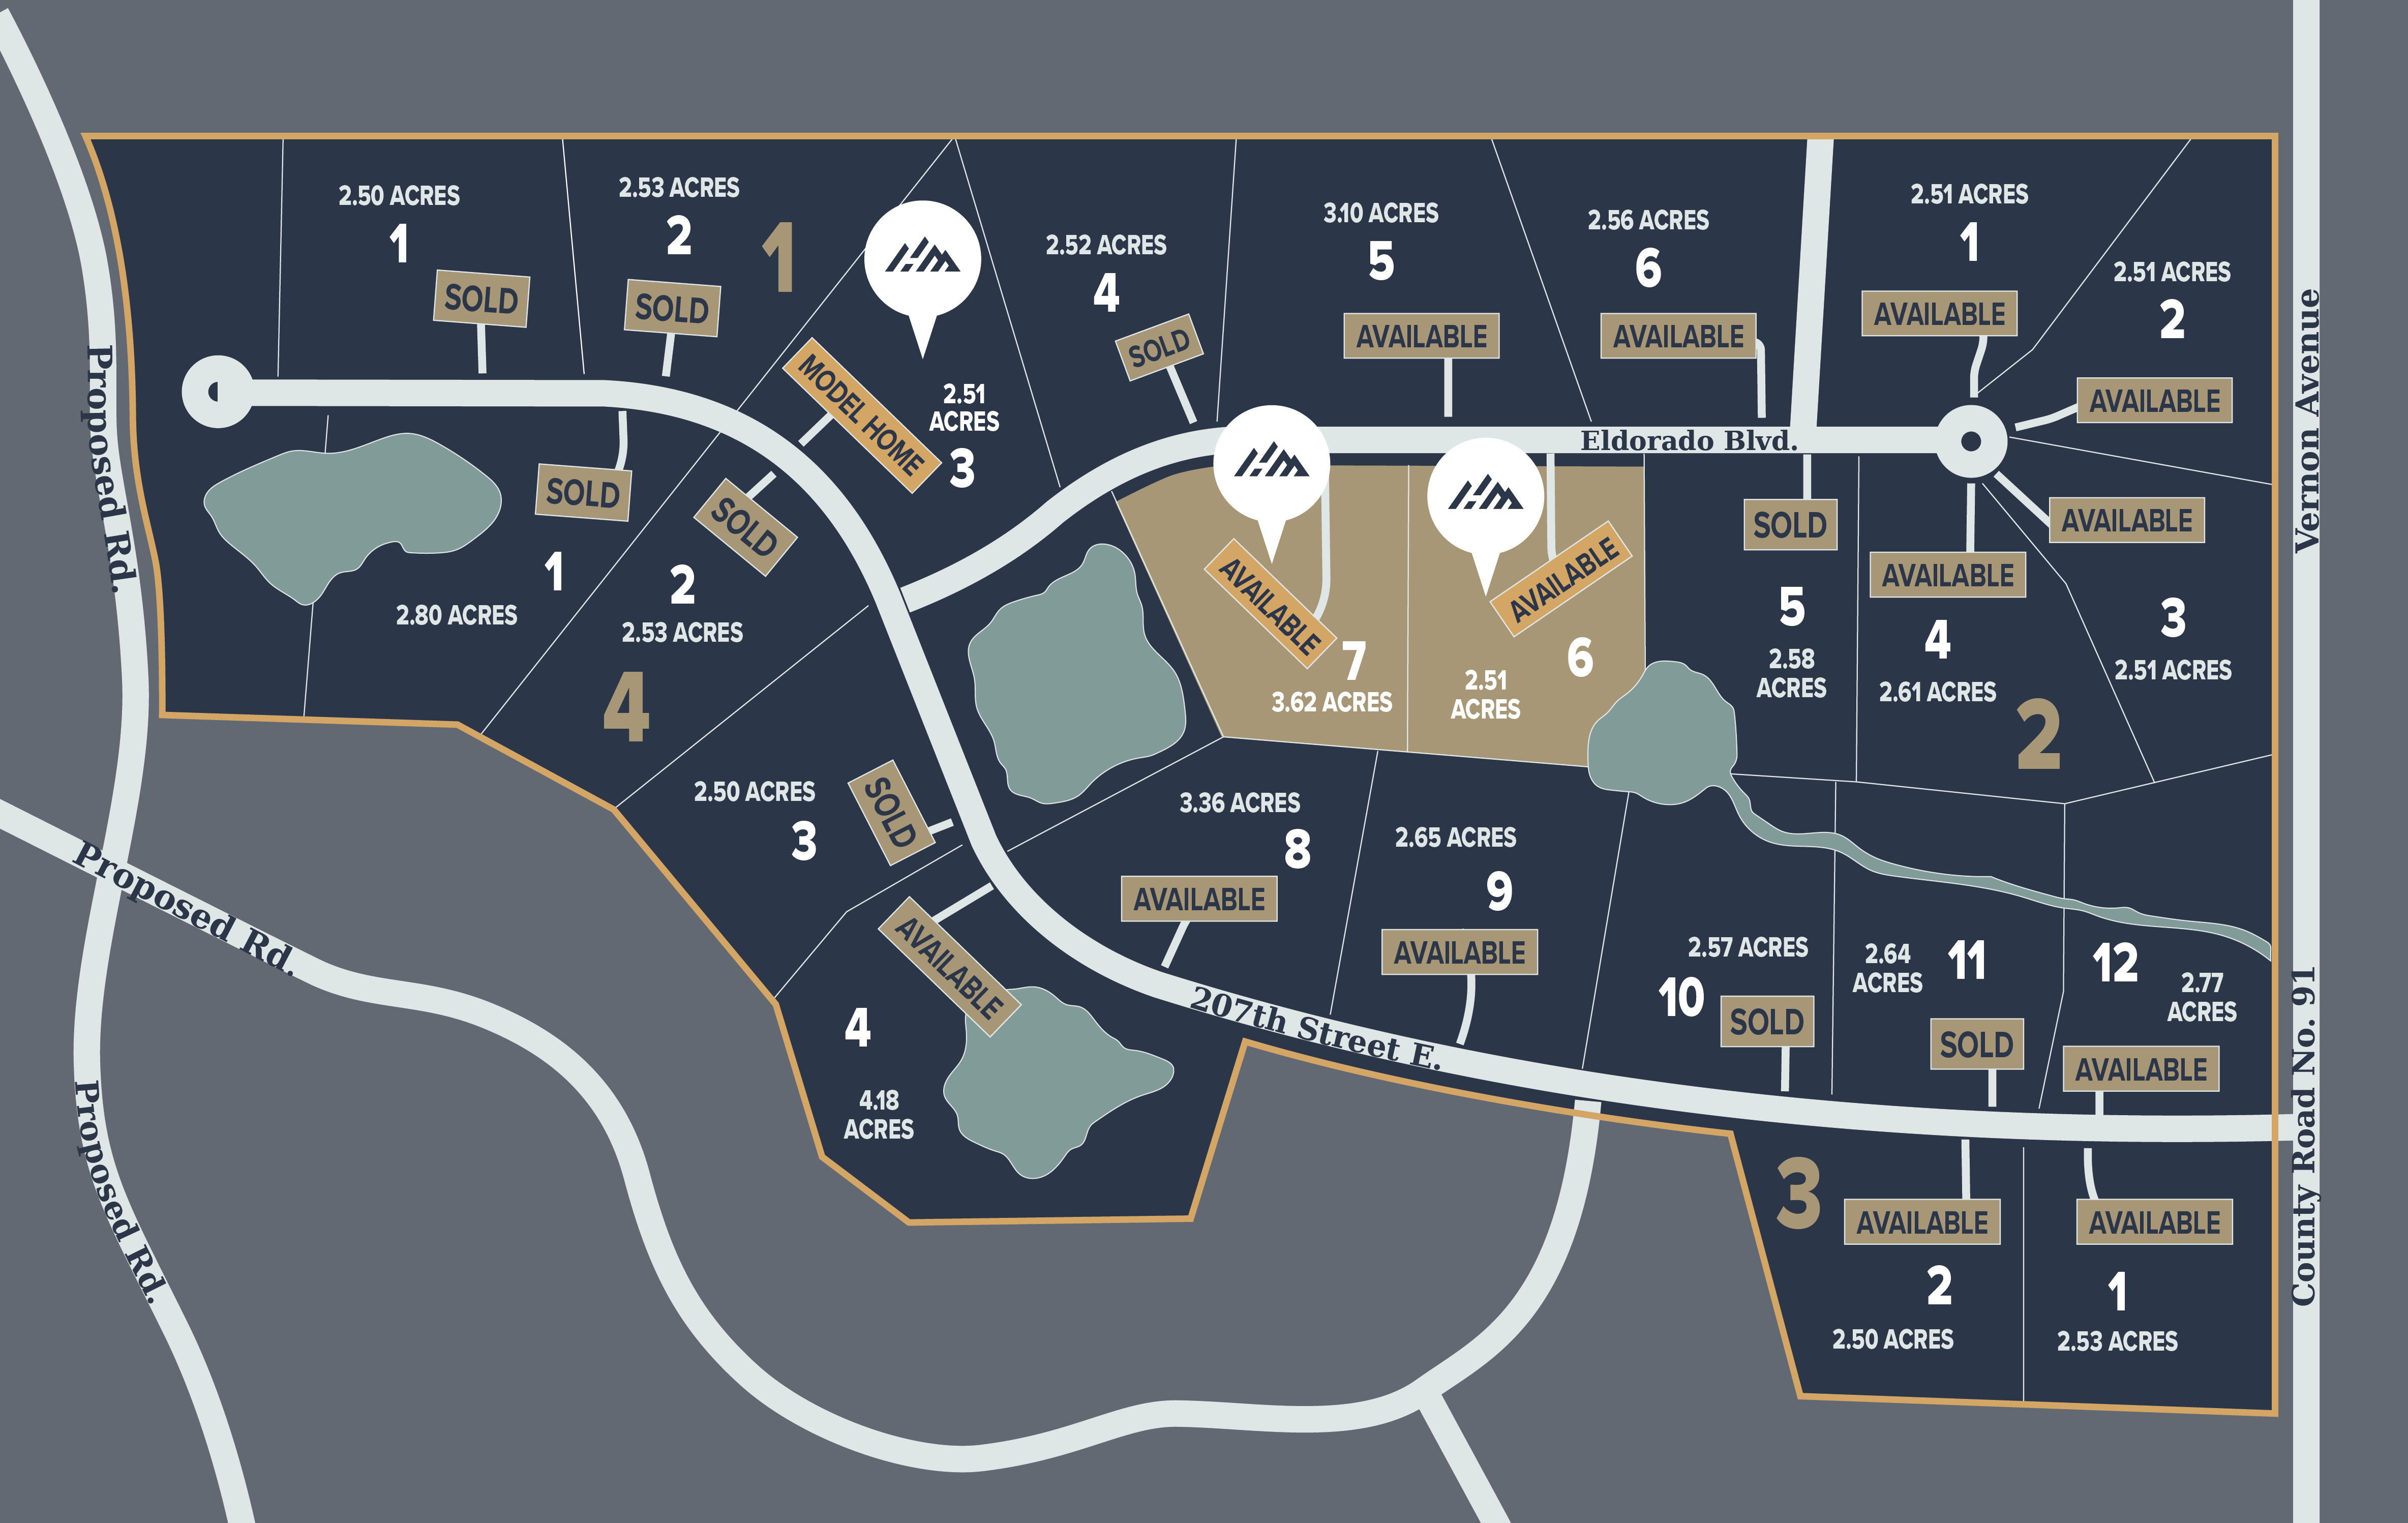 A map displaying available properties for sale within a residential development.